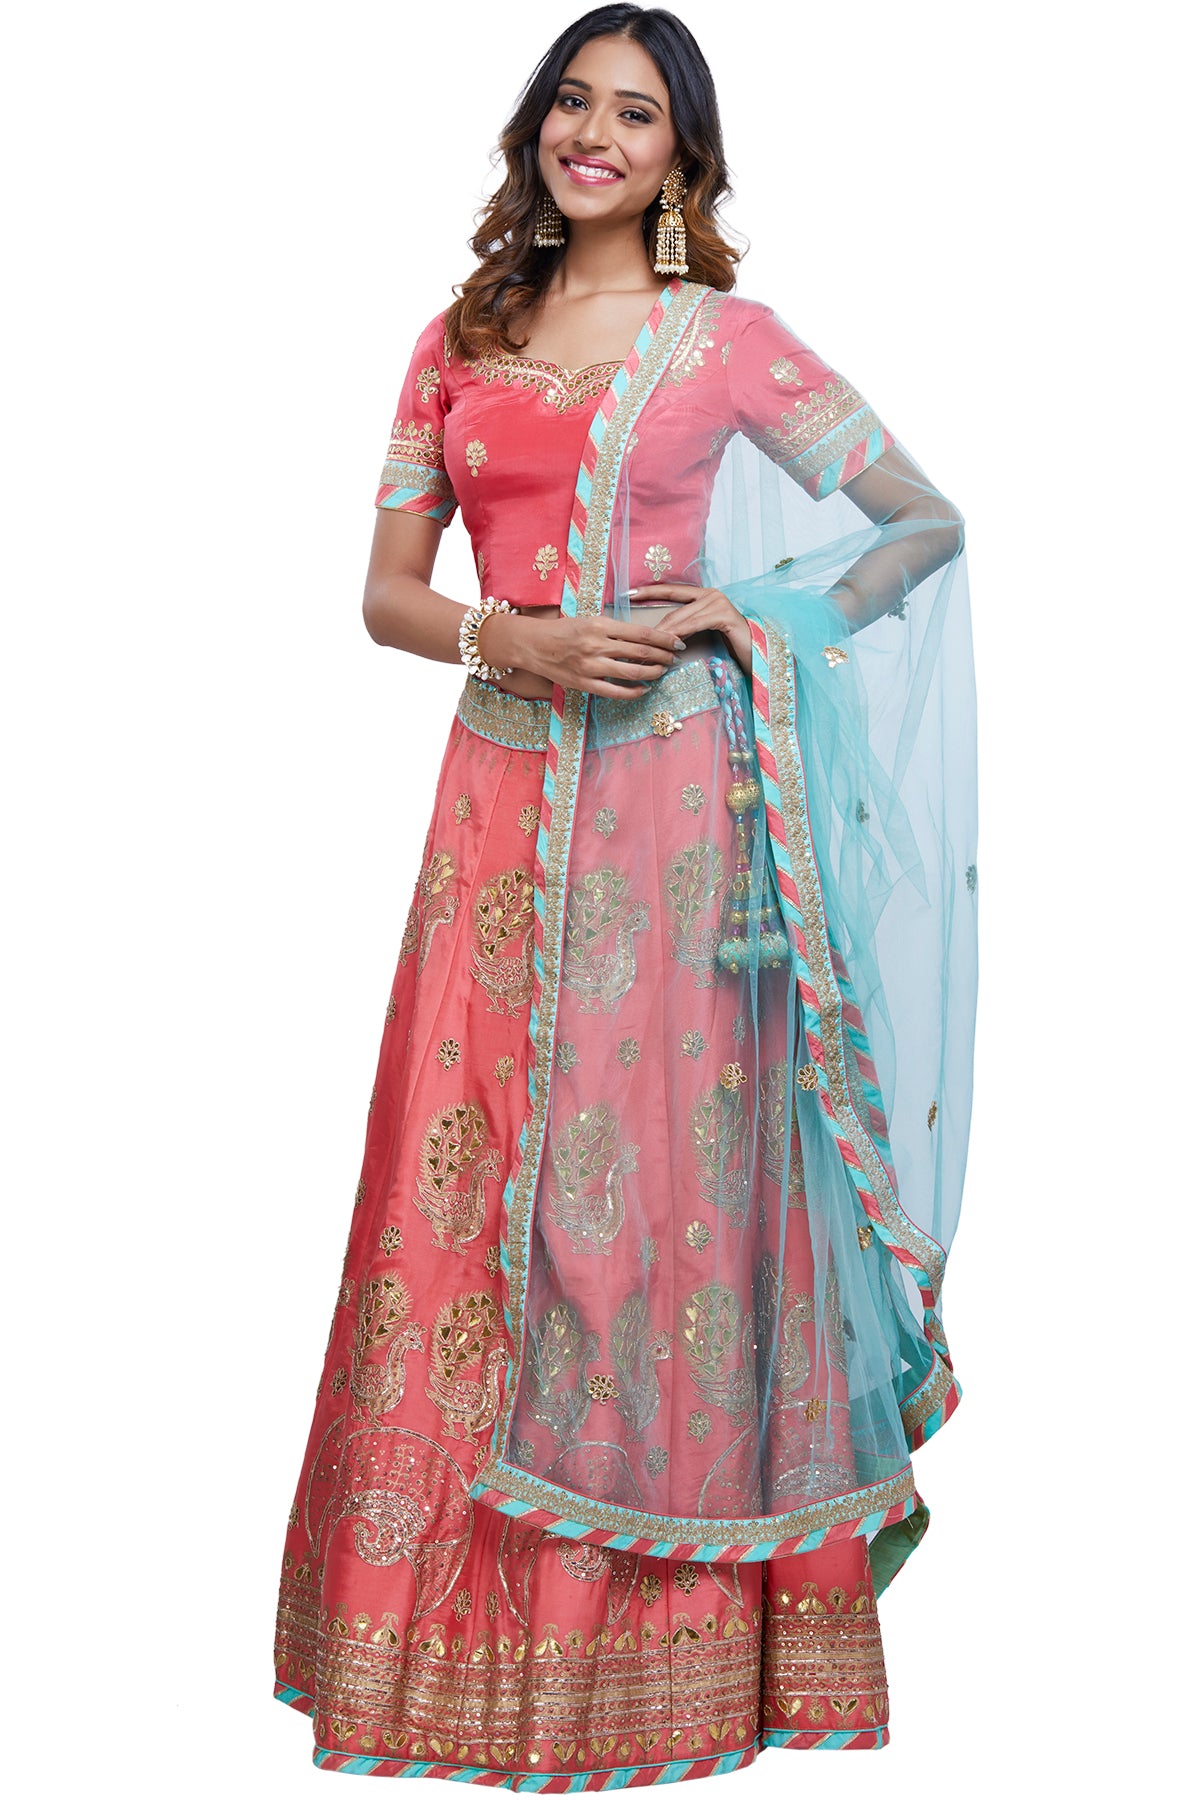 Step into the whimsical world of gorgeous fashion and meet some serious style goals with this stunning outfit. It comes with a pink silk choli, a sea green gota lehenga with peacock motifs and an embroidered net dupatta.